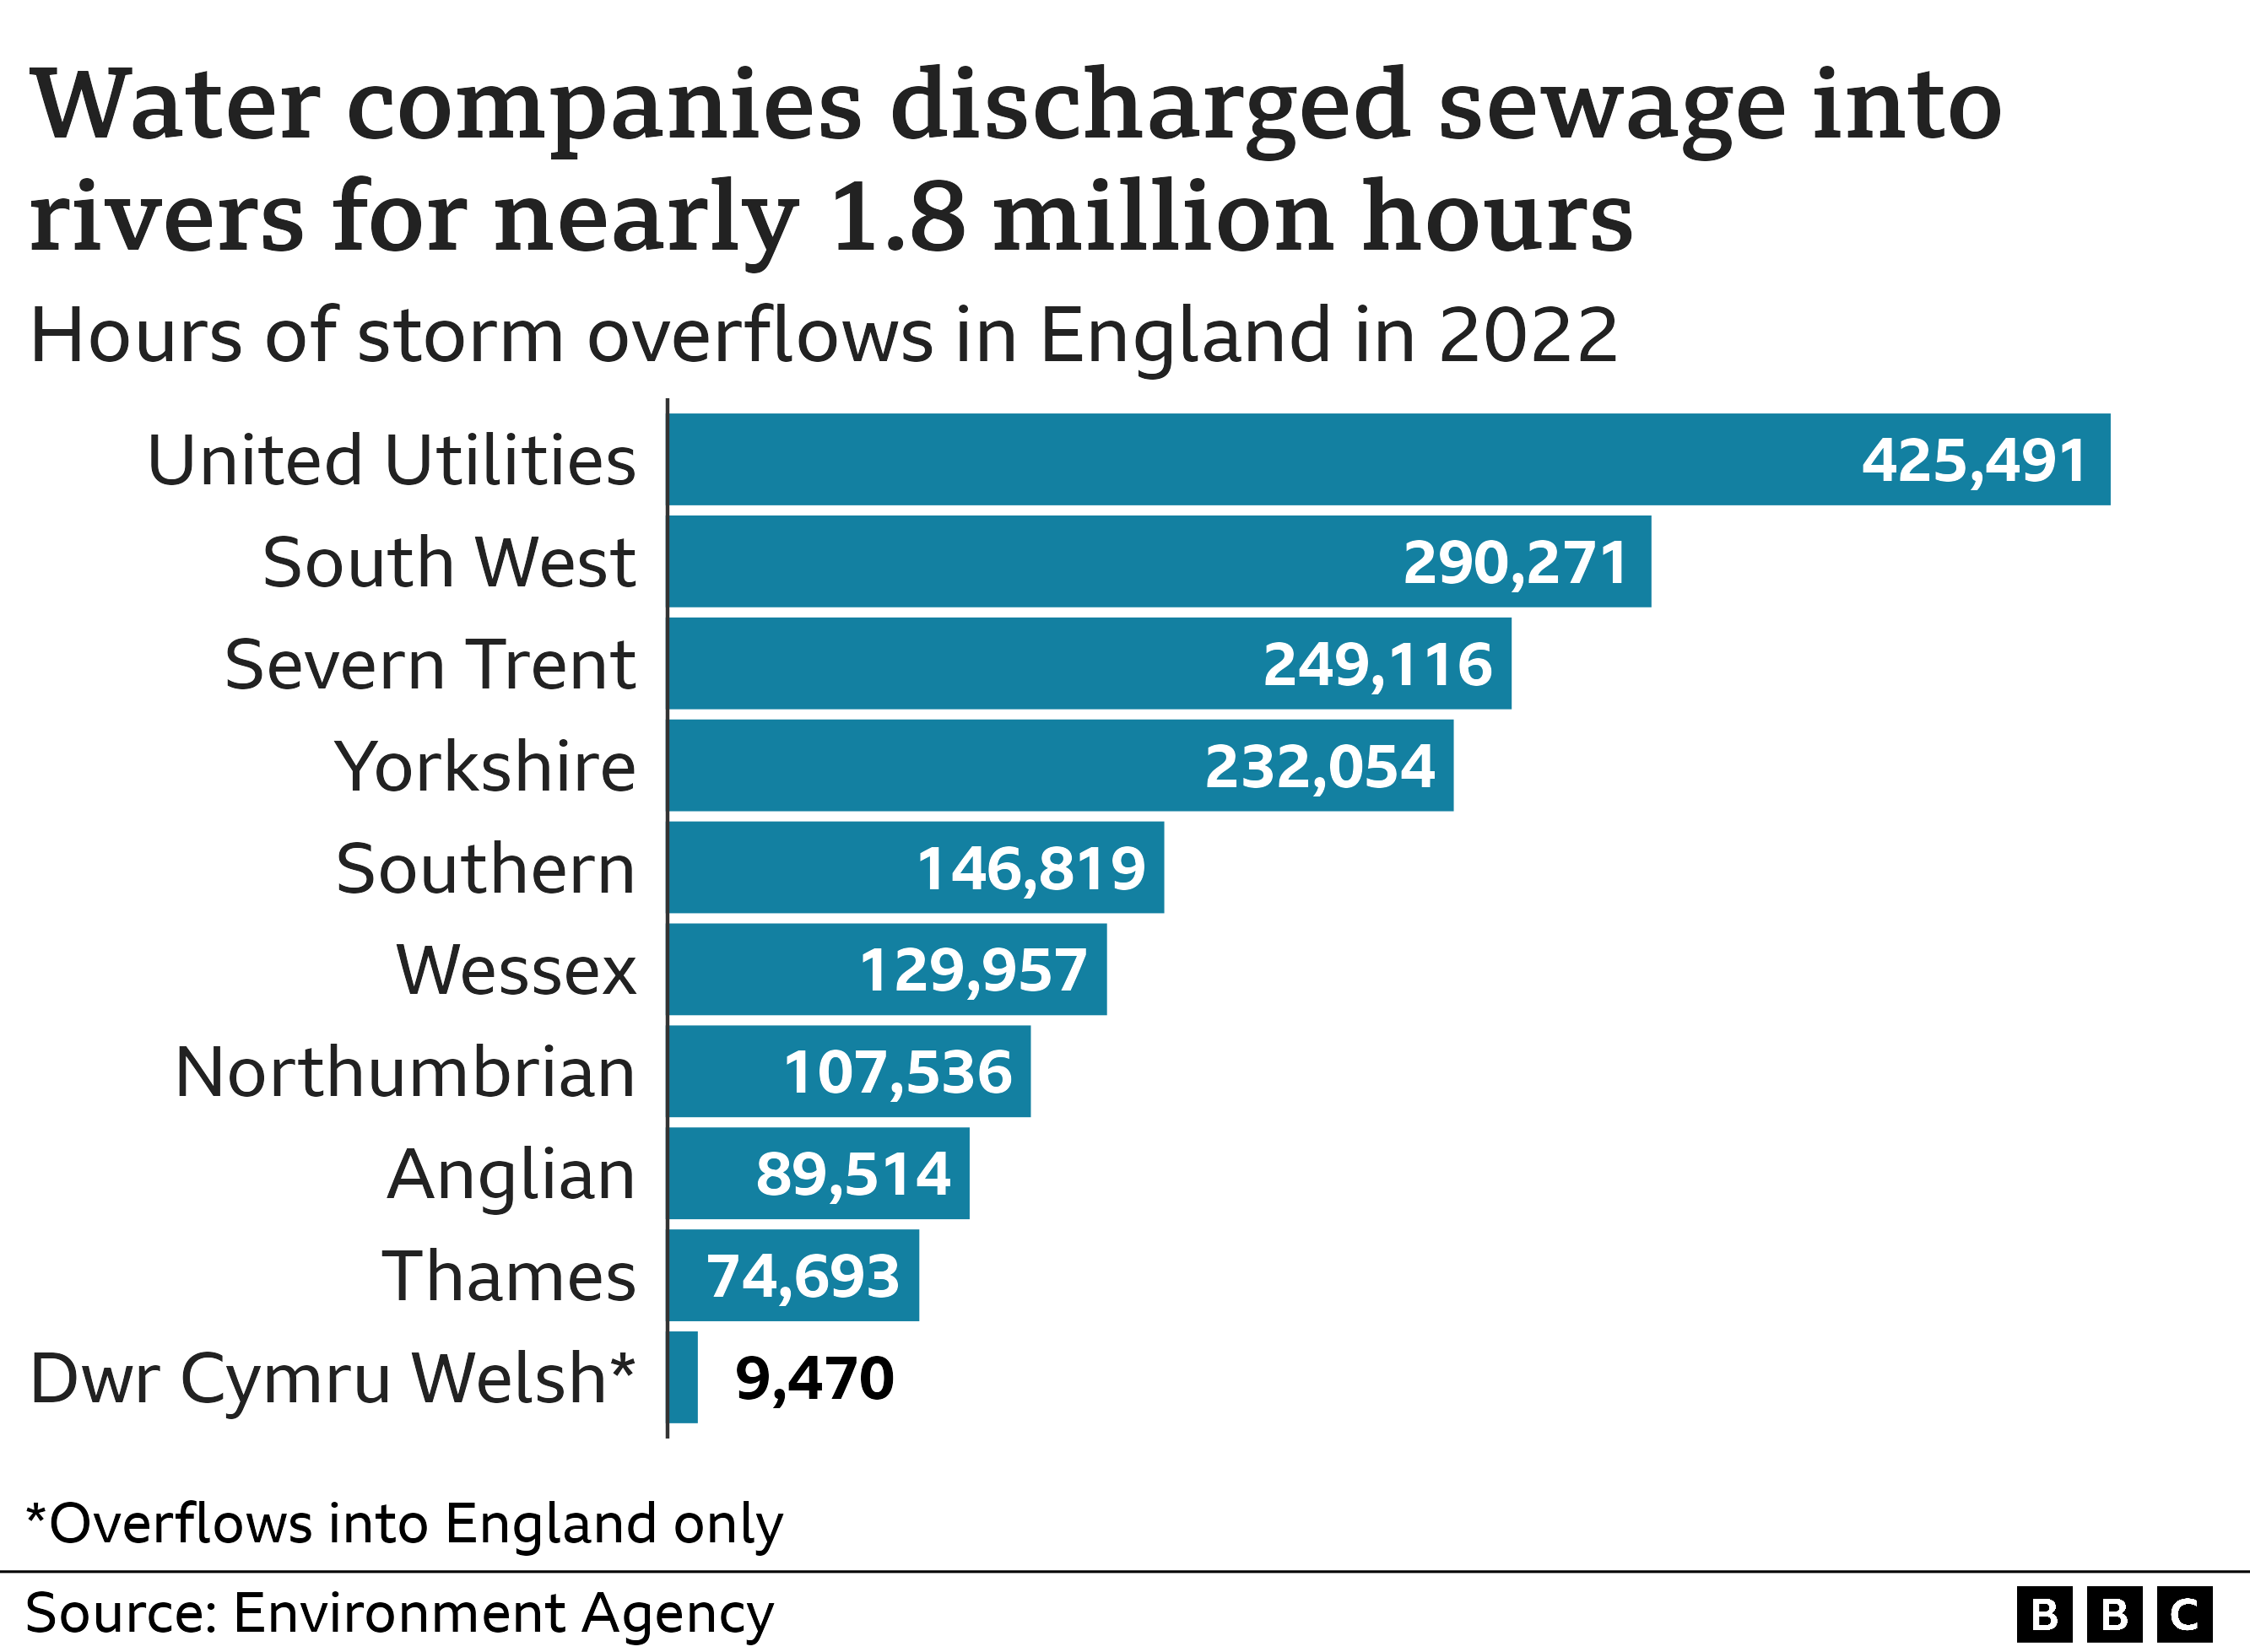 Chart showing water companies discharged sewage into rivers in England for nearly 1.8m hours in 2022, with United Utilities at about 425,000 hours, South West Water 290,000, Severn 249,000, Yorkshire 232,000, Southern 147,000, Wessex 130,000, Northumbrian 108,000, Anglian 90,000, Thames 75,000 and Dyr Cymru Welsh 9,000